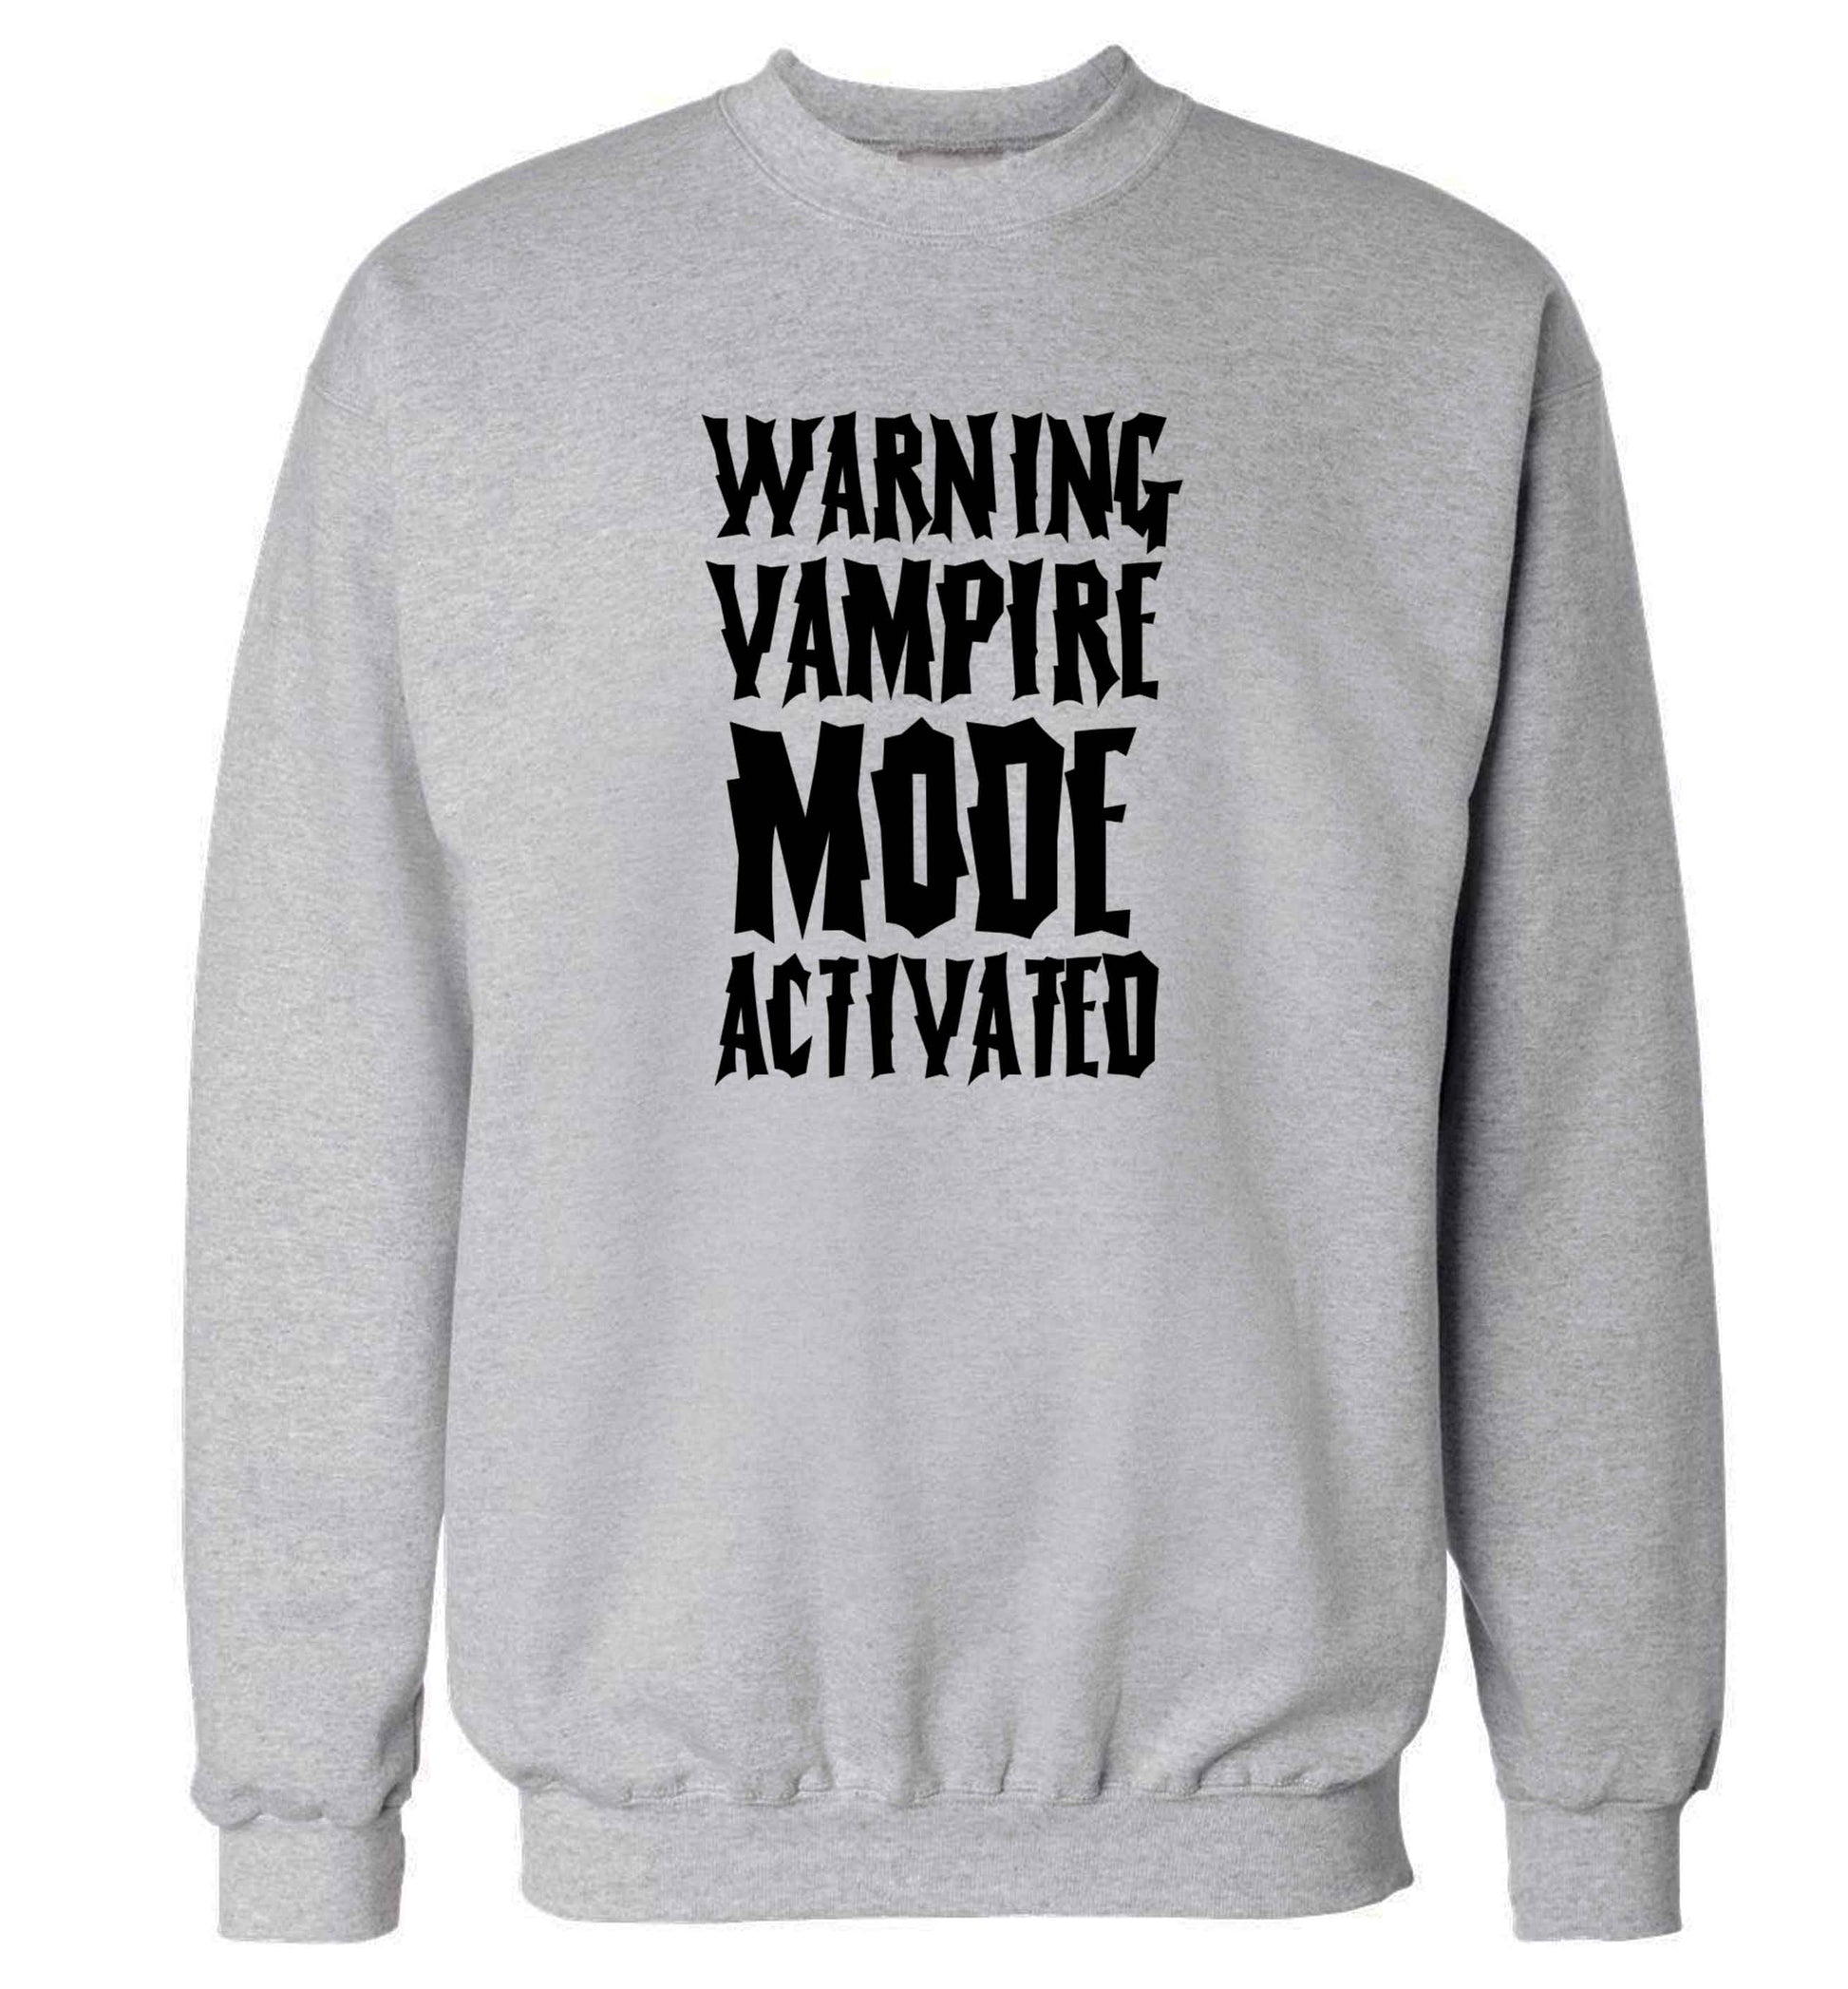 Warning vampire mode activated adult's unisex grey sweater 2XL